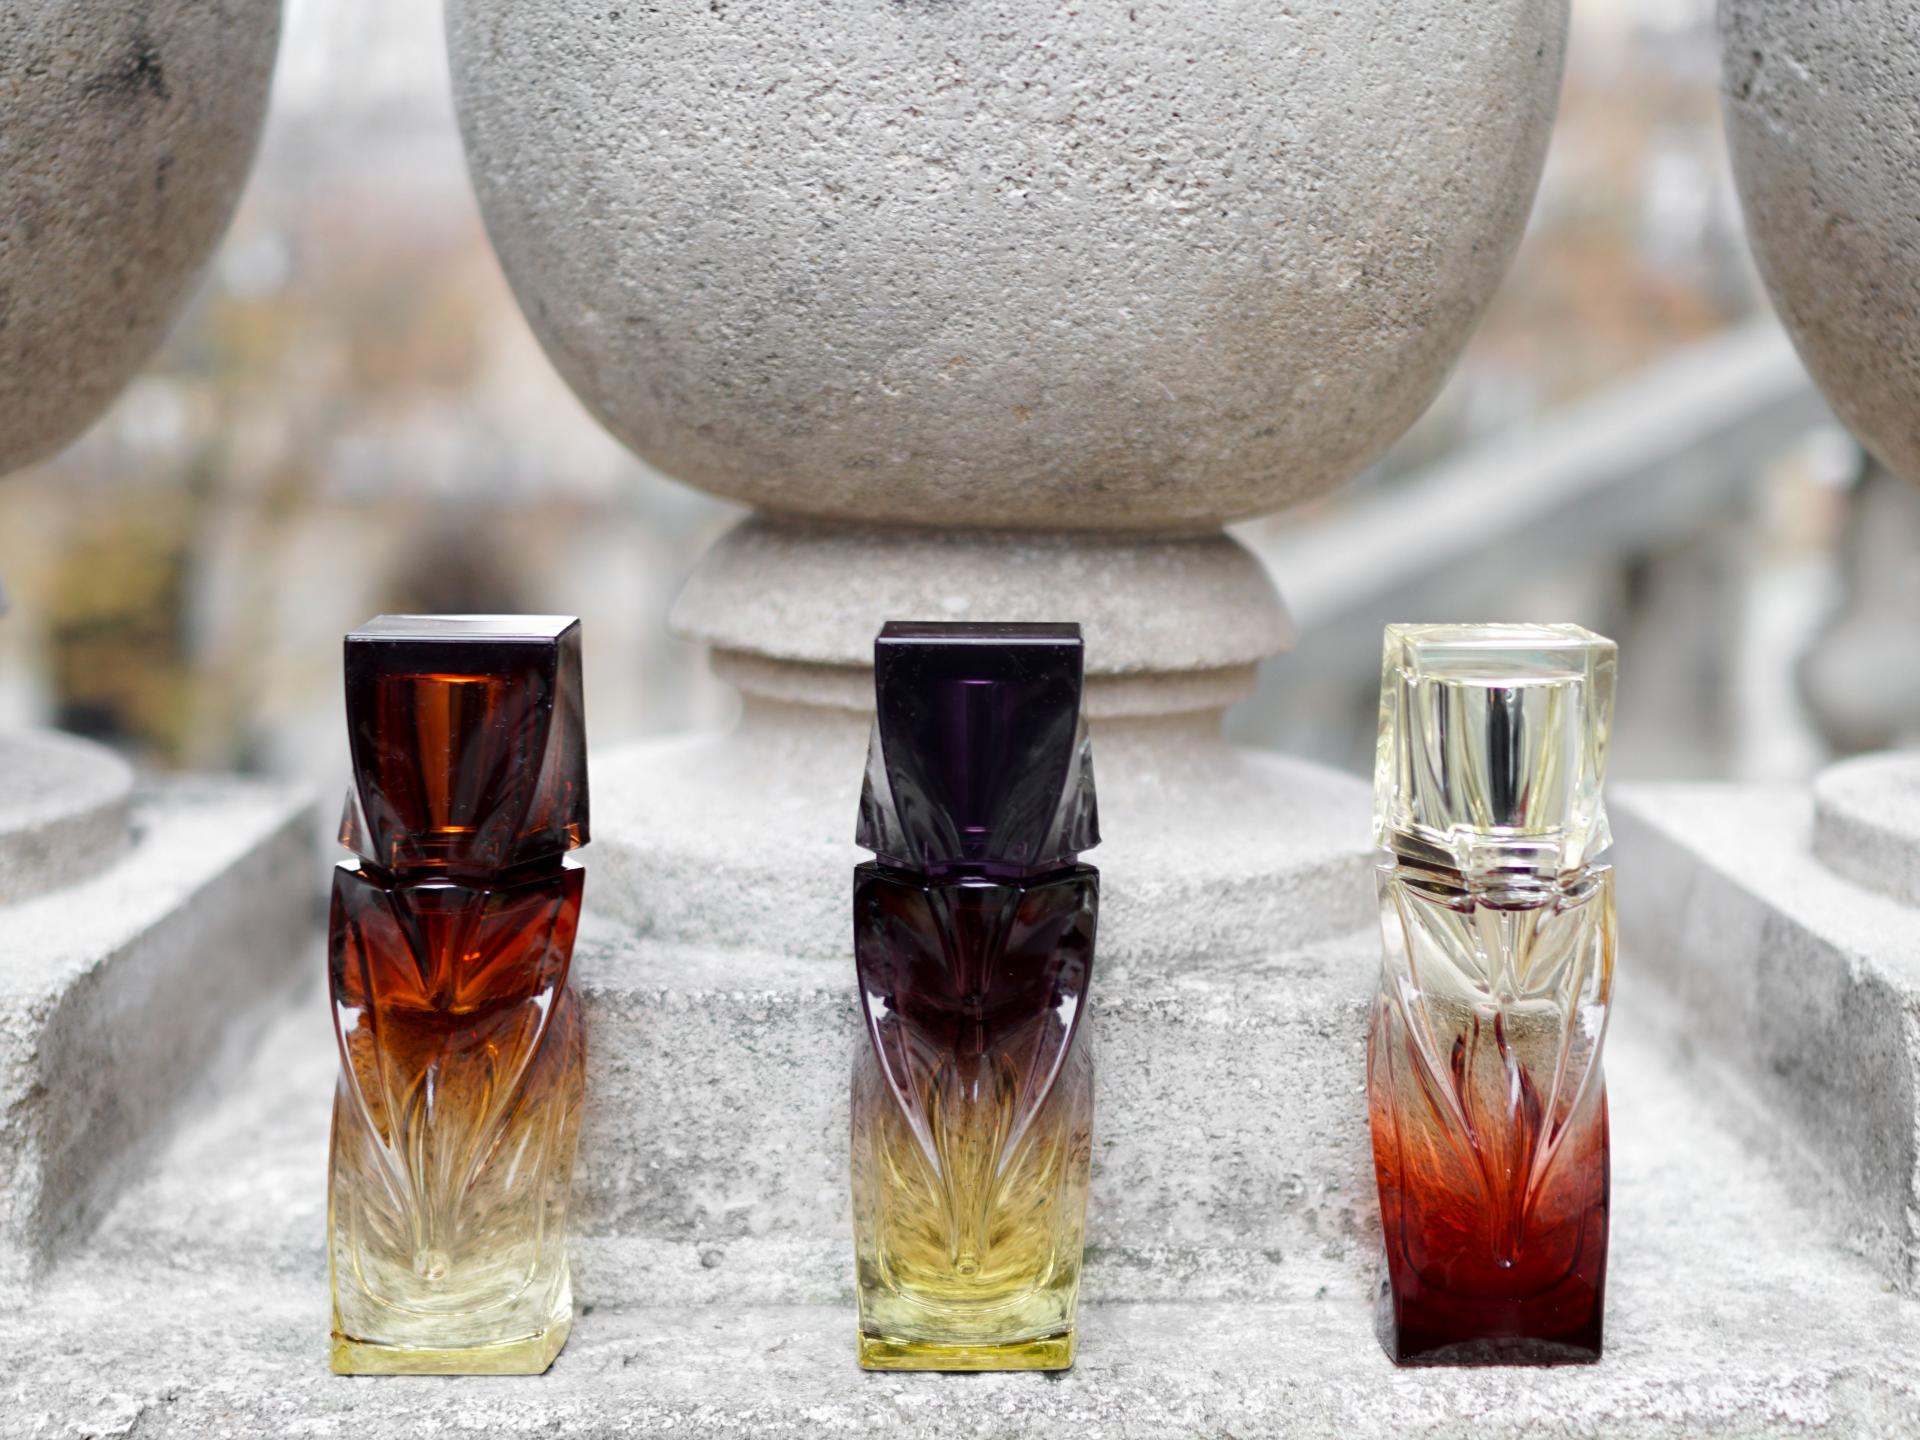 Create your own fragrance that will have your name